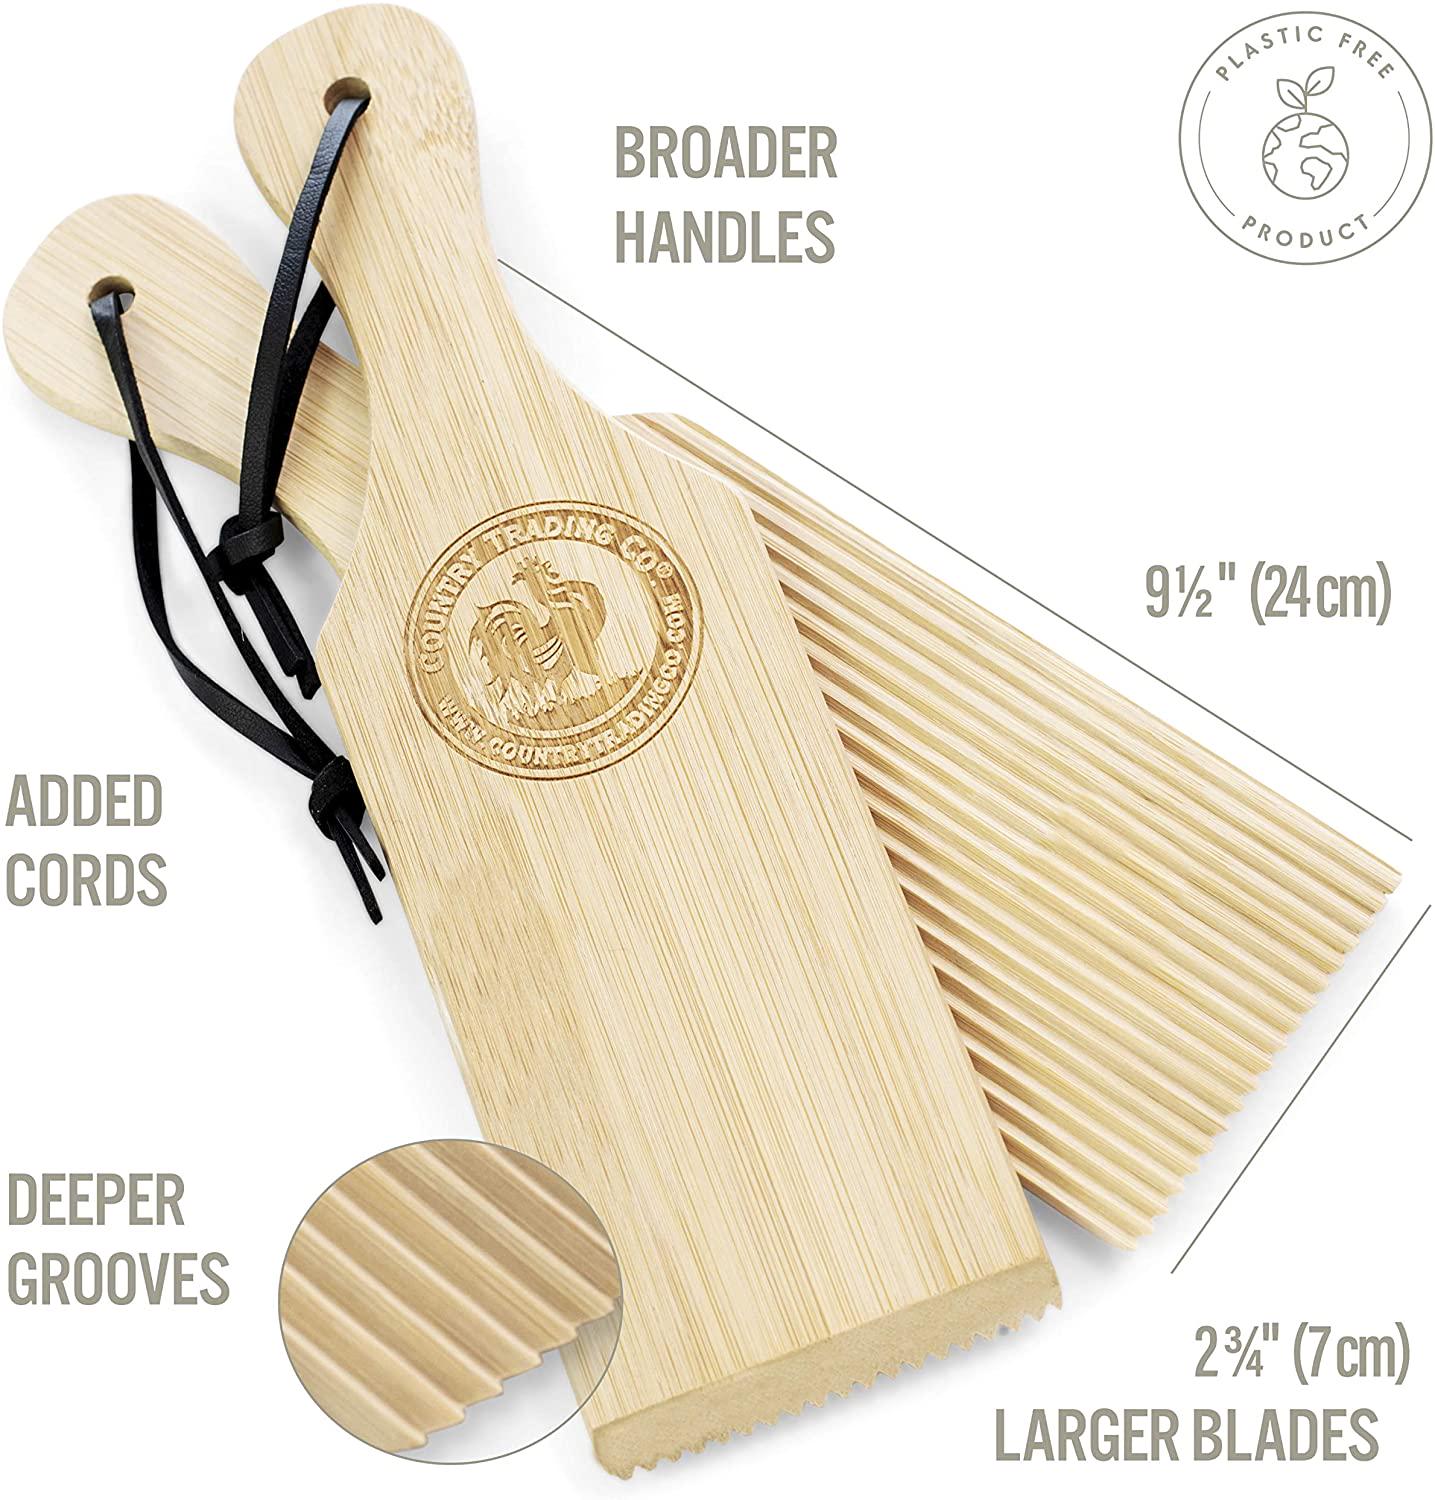 Country Trading Co., Gnocchi Boards and Wooden Butter Paddles to Easily Create Authentic Homemade Pasta and Butter Without Sticking - Set of 2 Makers - 24 cm